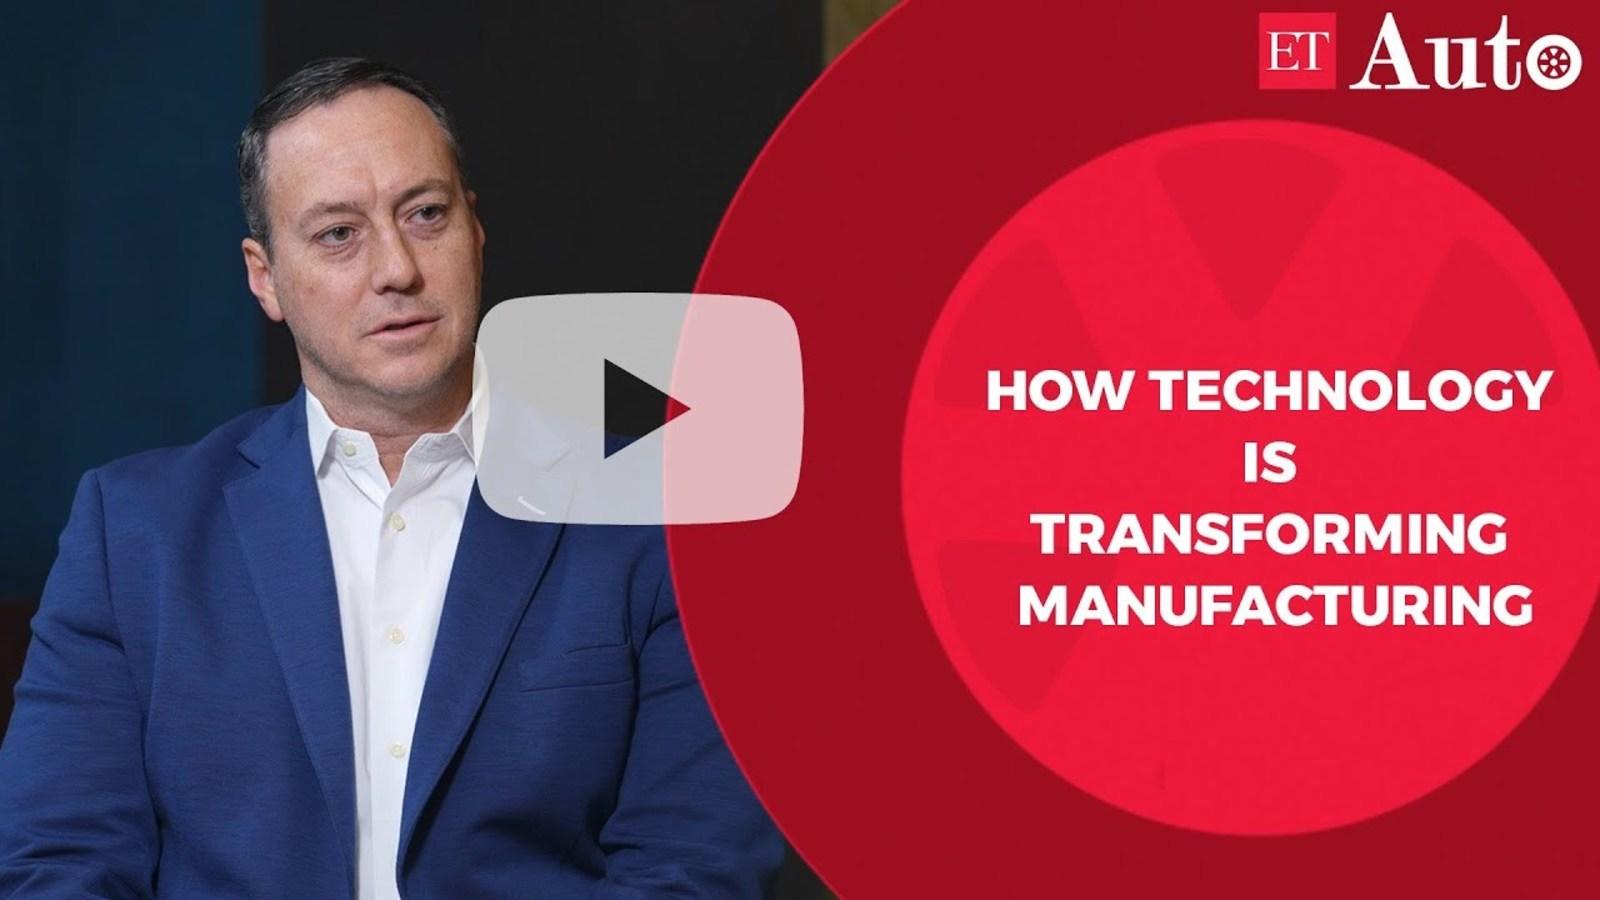 The Transformation of Manufacturing through Technology